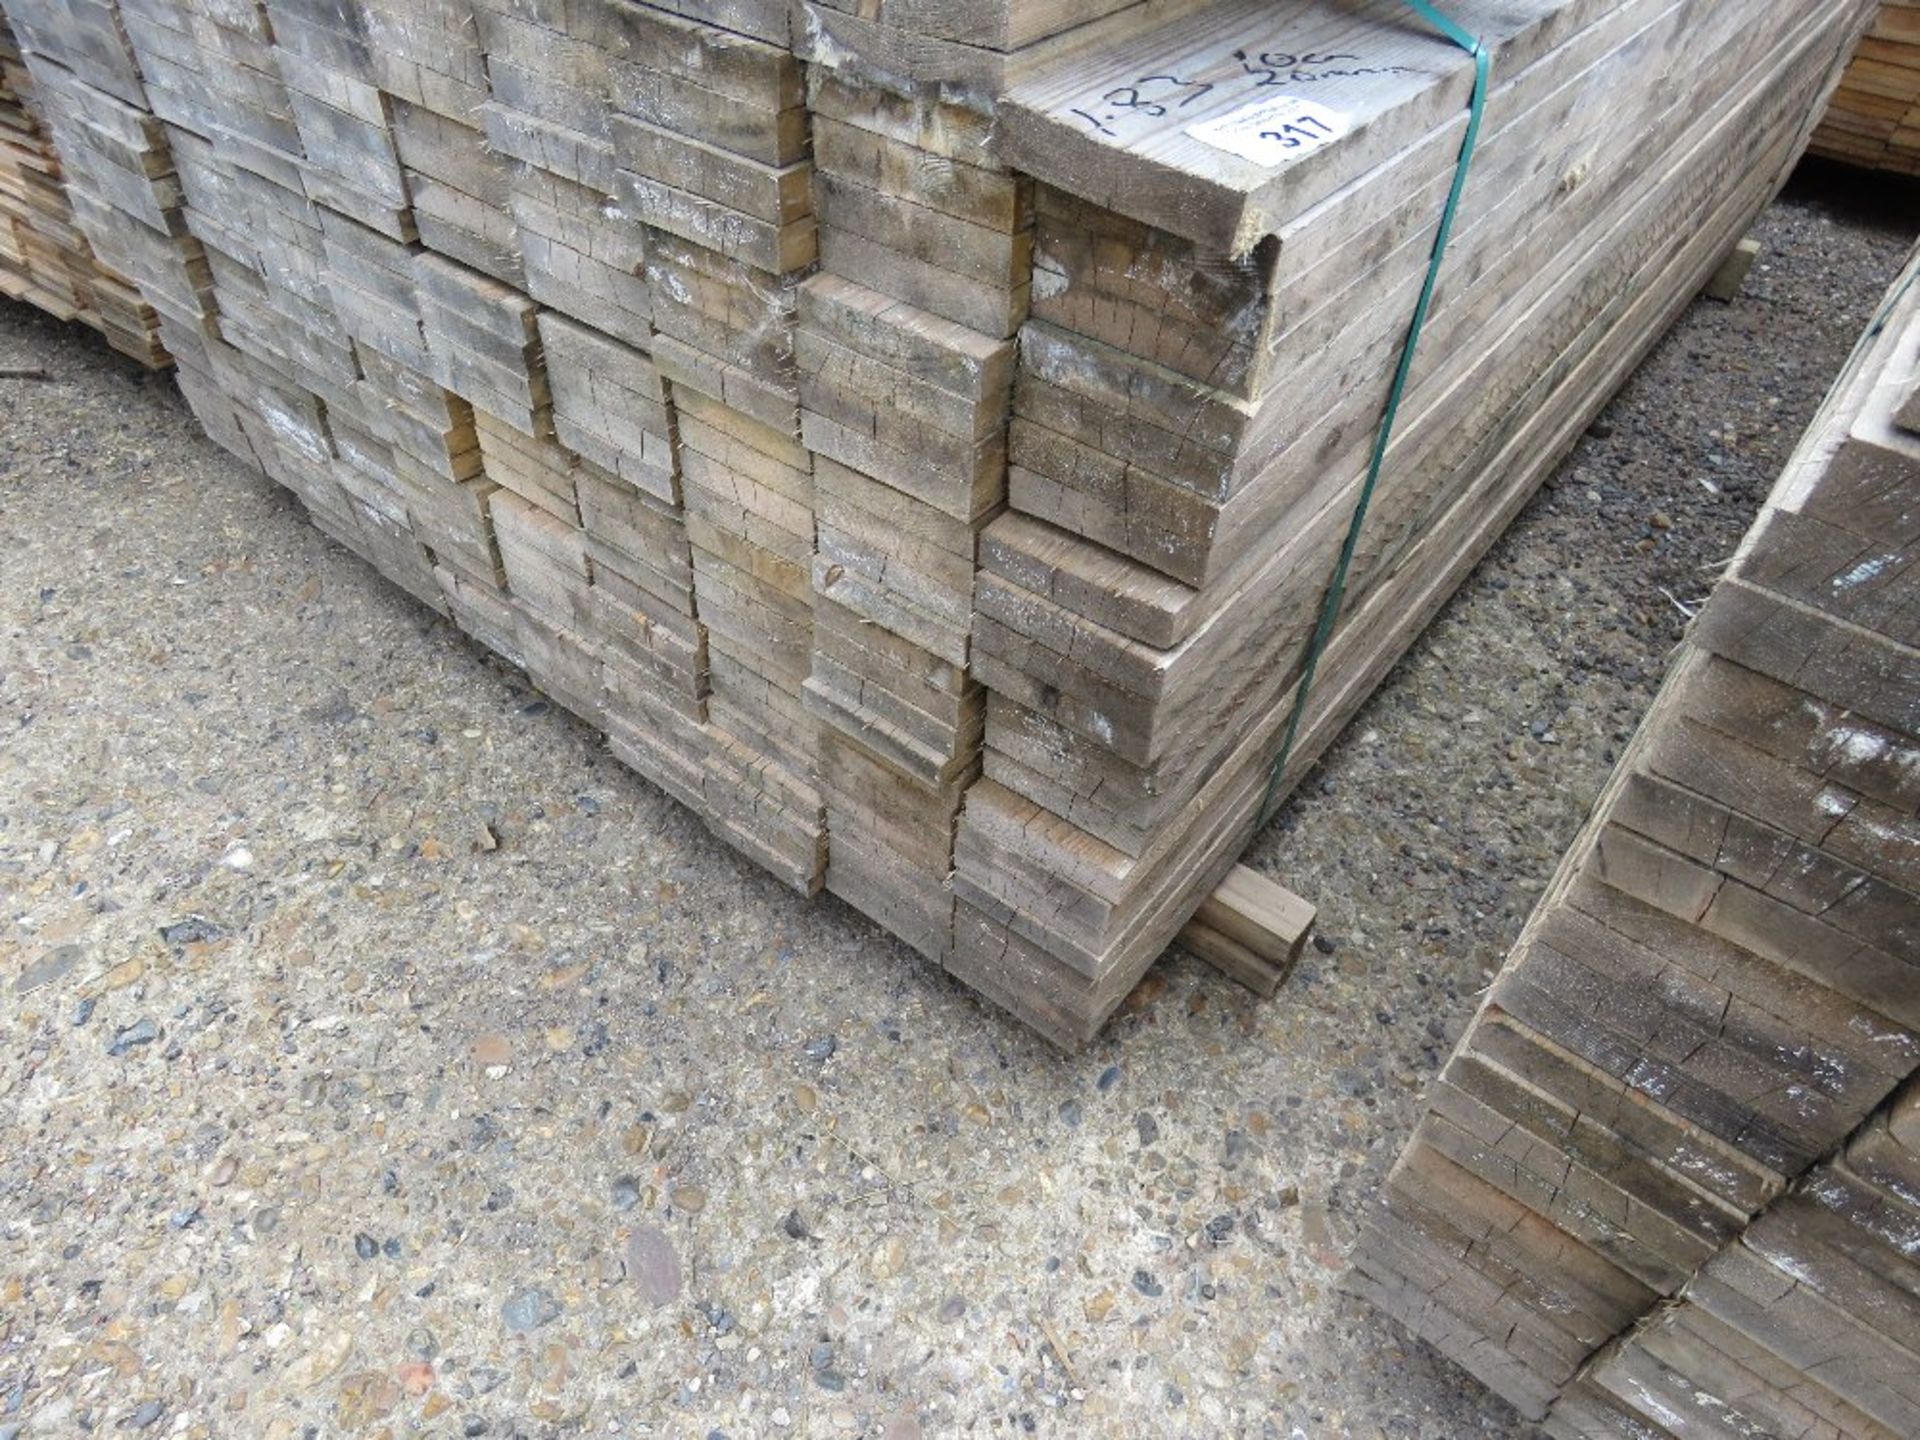 LARGE PACK OF UNTREATED FENCE CLADDING TIMBER BOARDS, 1.83M LENGTH X 10CM WIDTH X 2CM DEPTH APPROX.